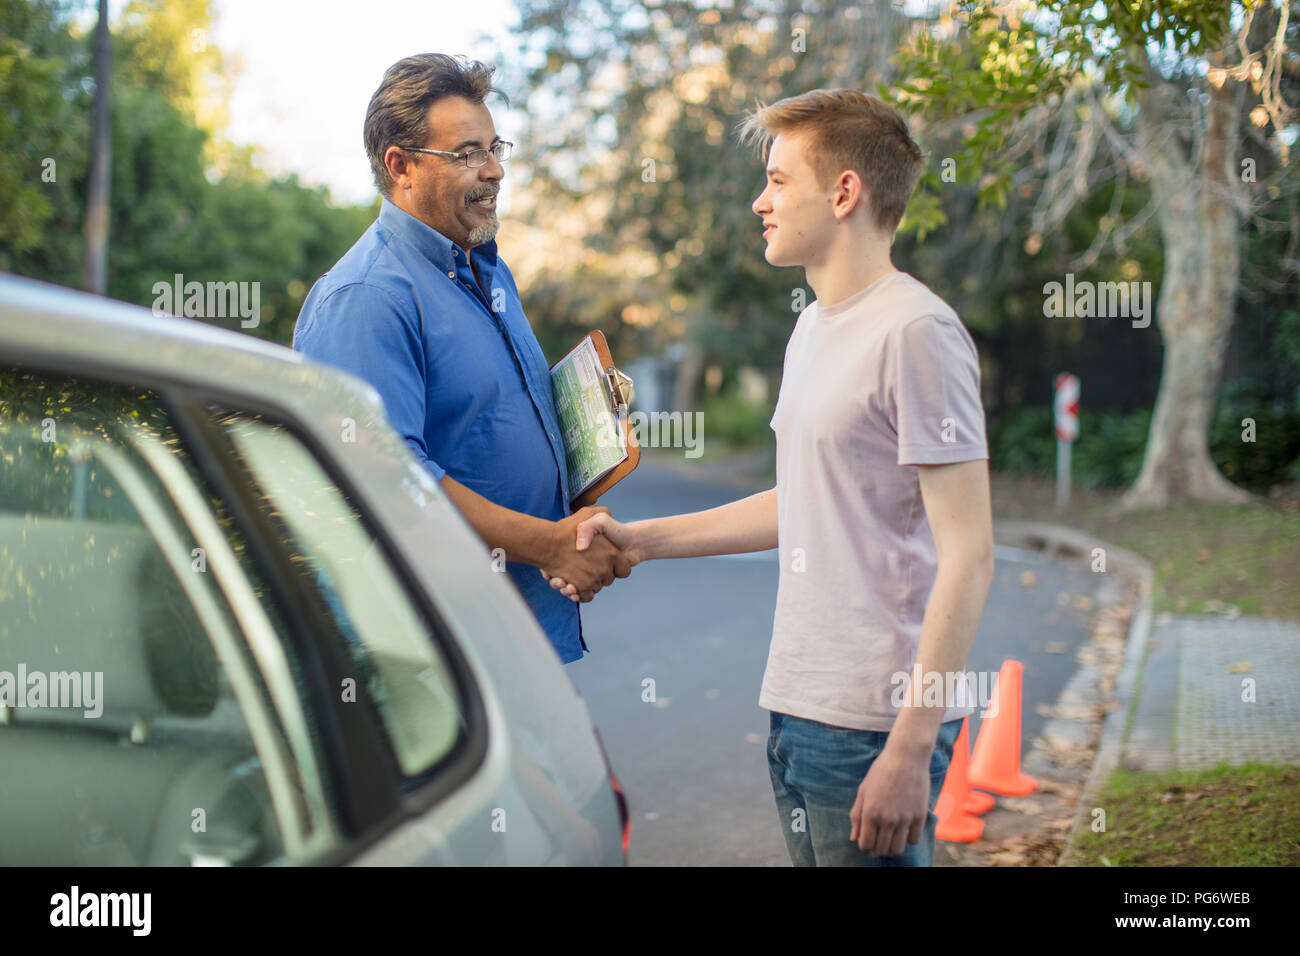 Learner driver and instructor shaking hands at car Stock Photo